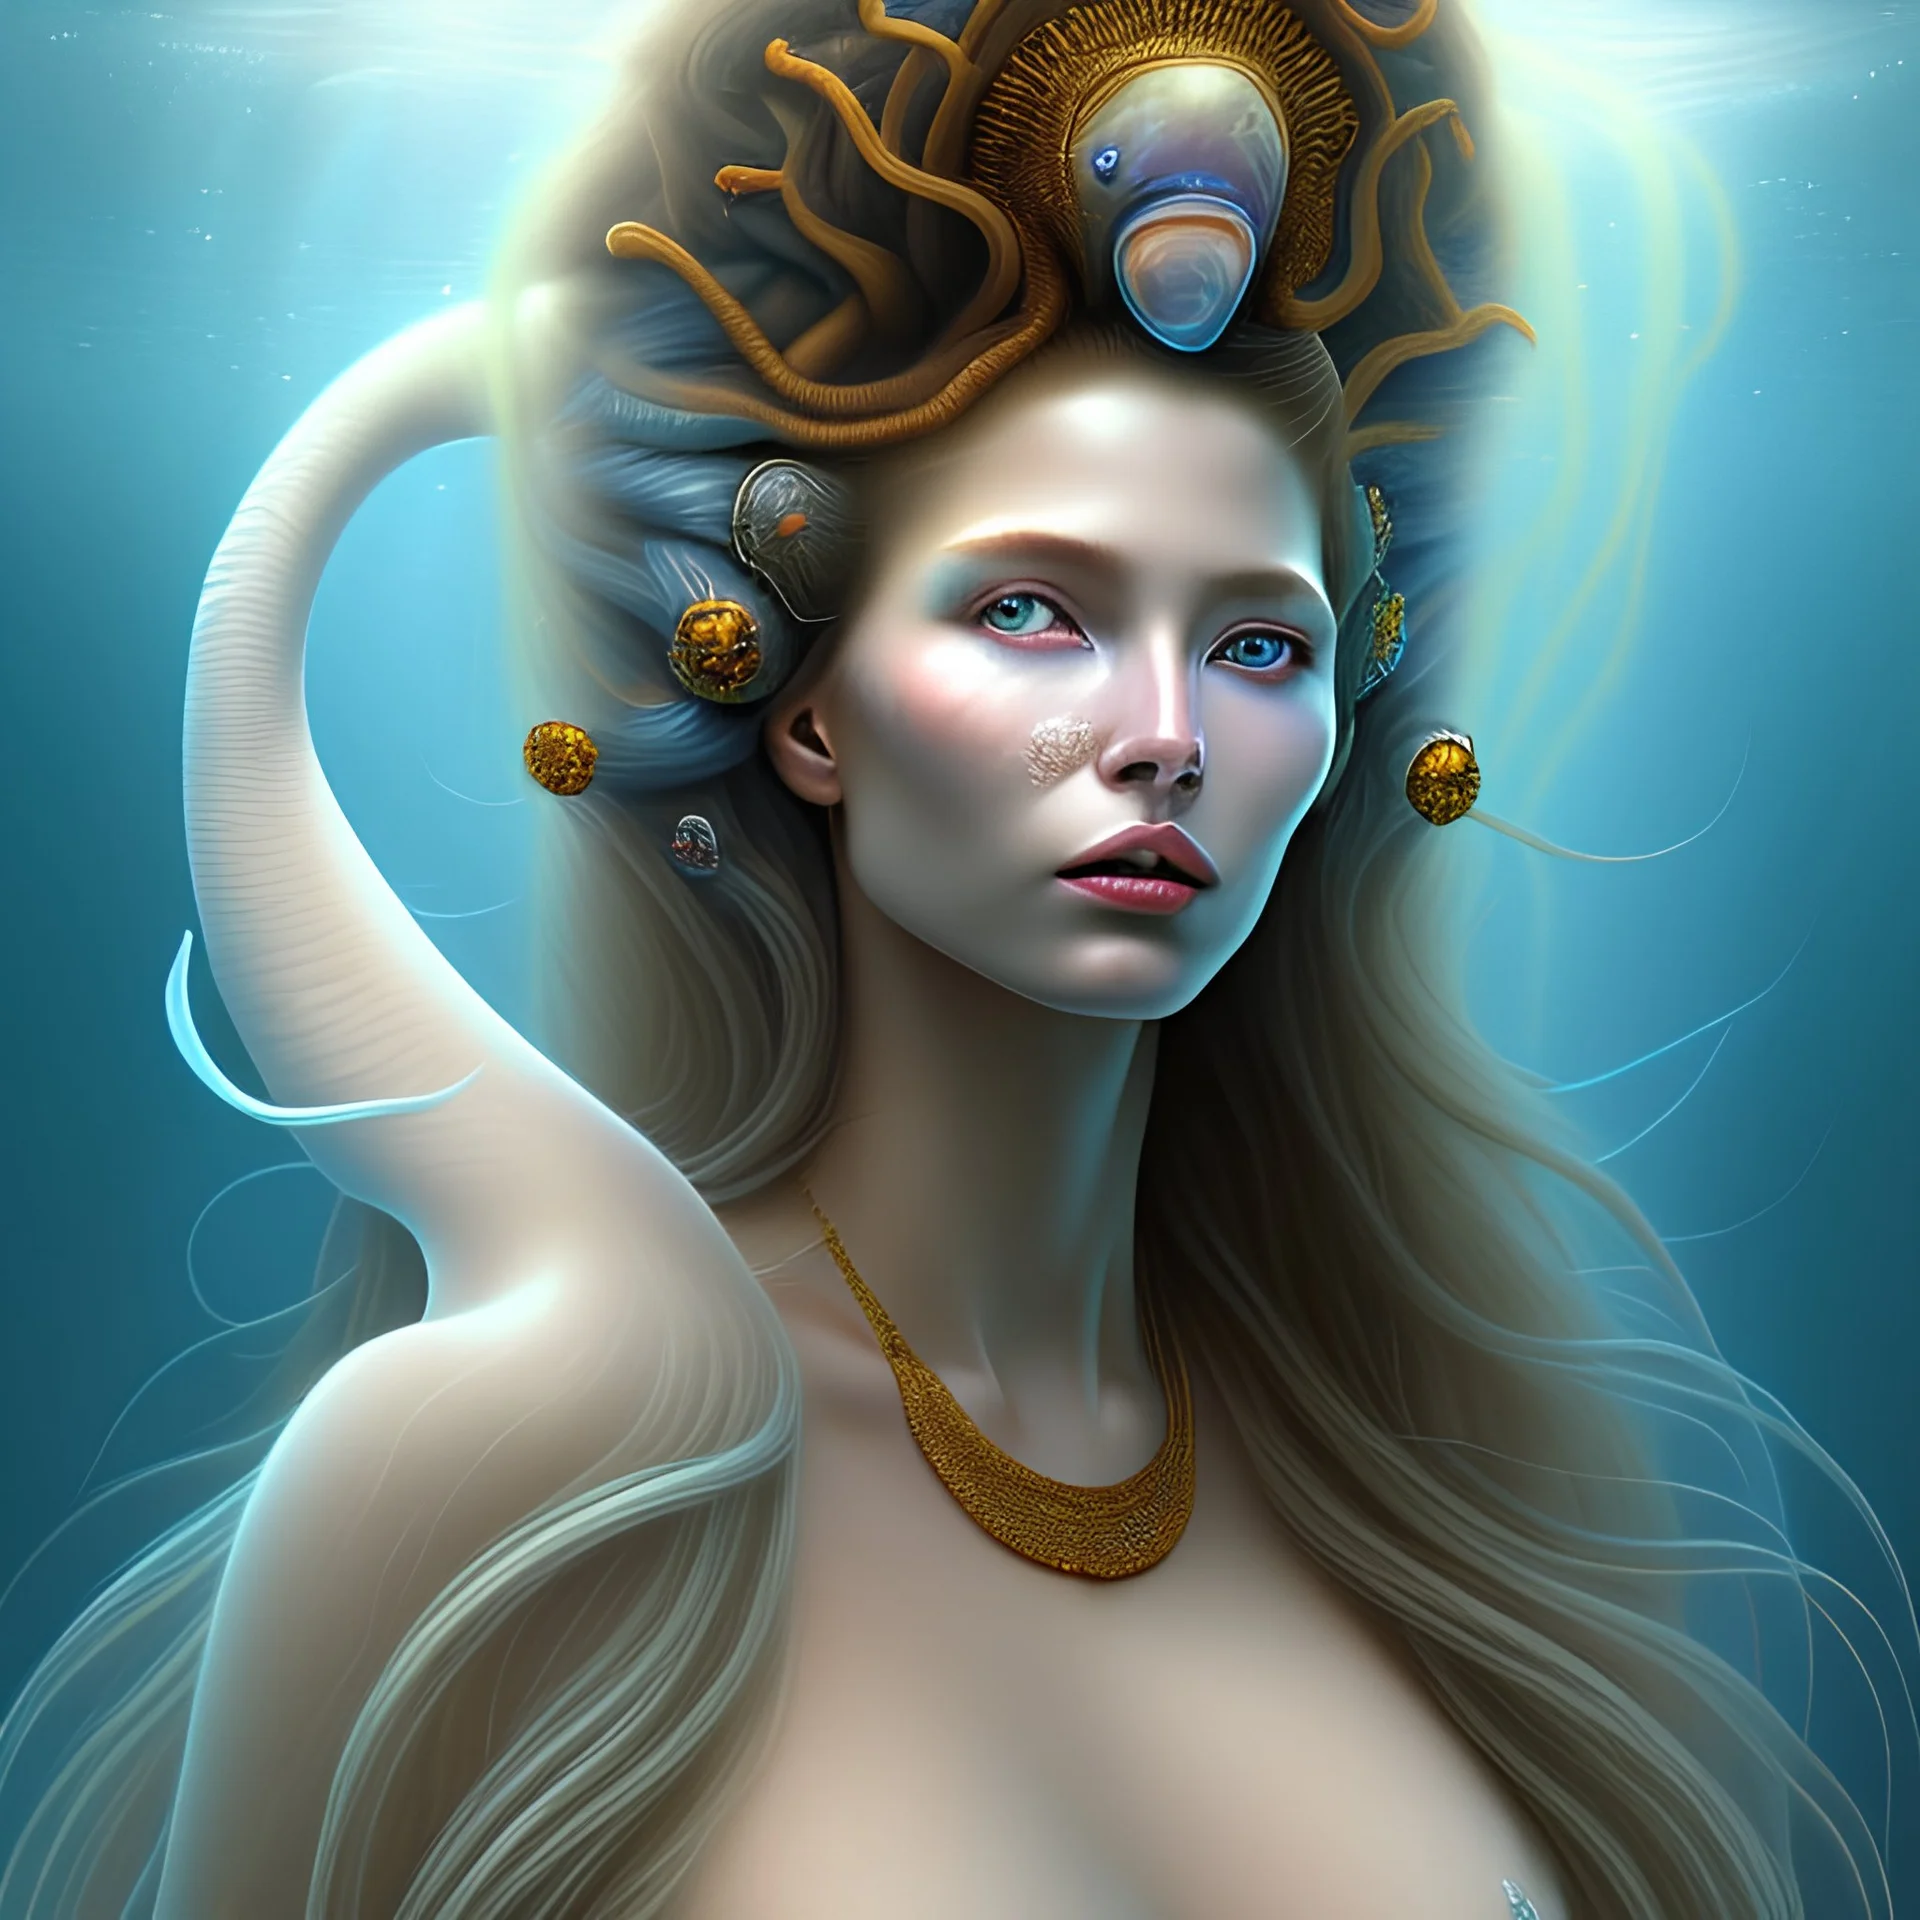 Painting of an underwater Goddess with very long, dark, wavy hair floating all over the place. She has white eyes with strange runes in them, burnt sienna skin tone, and she is holding a beluga whale against her body to cover it.